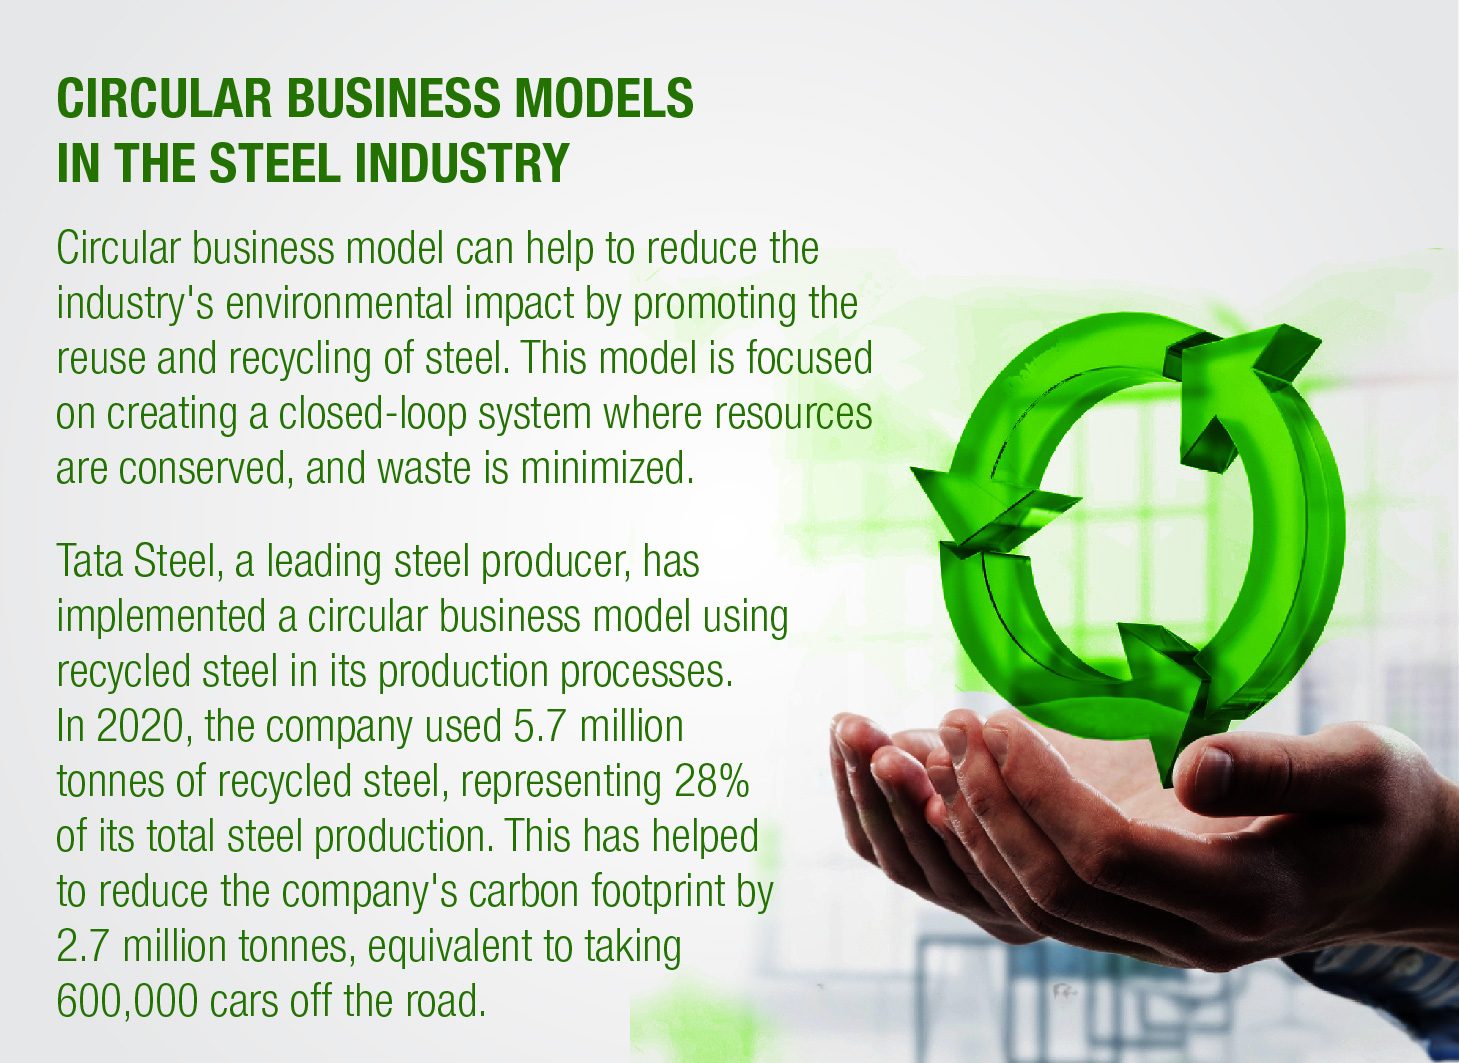 Is Steel the Key to a Circular Economy?